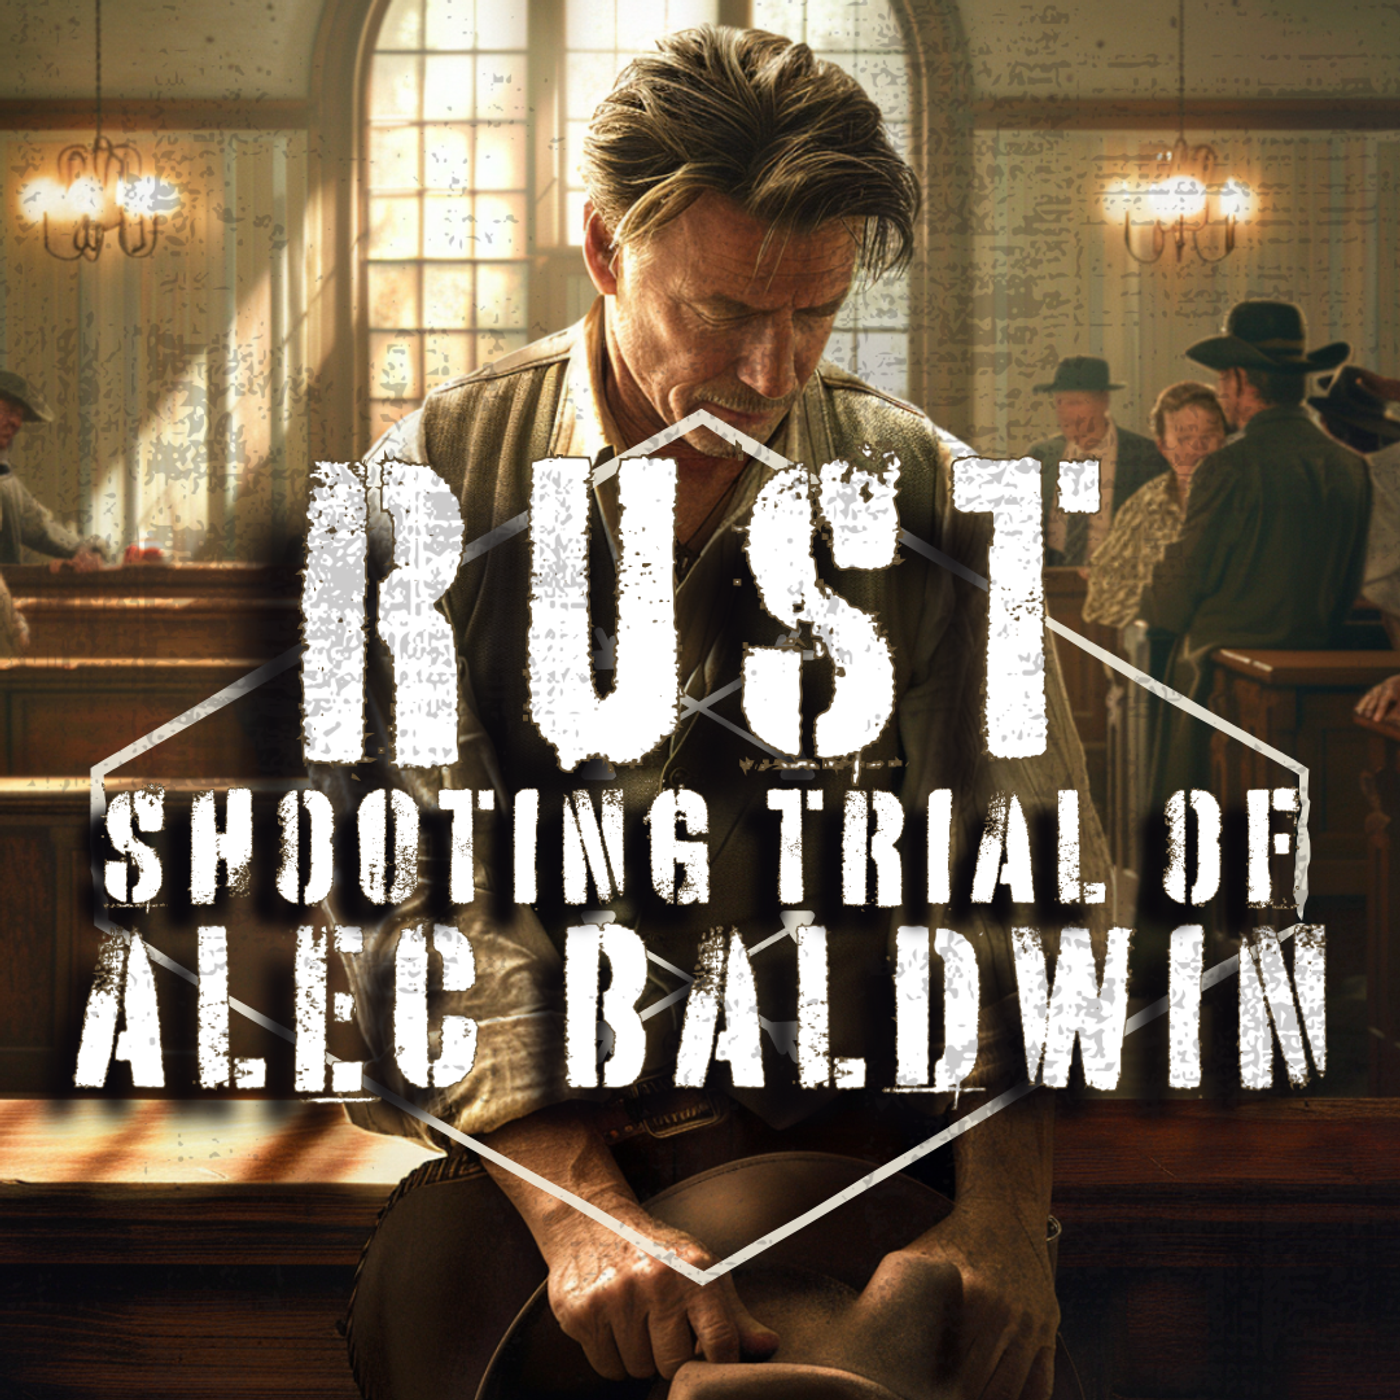 Could Alec Baldwin Pull The Rust Gun Trigger And Not Even Know It?